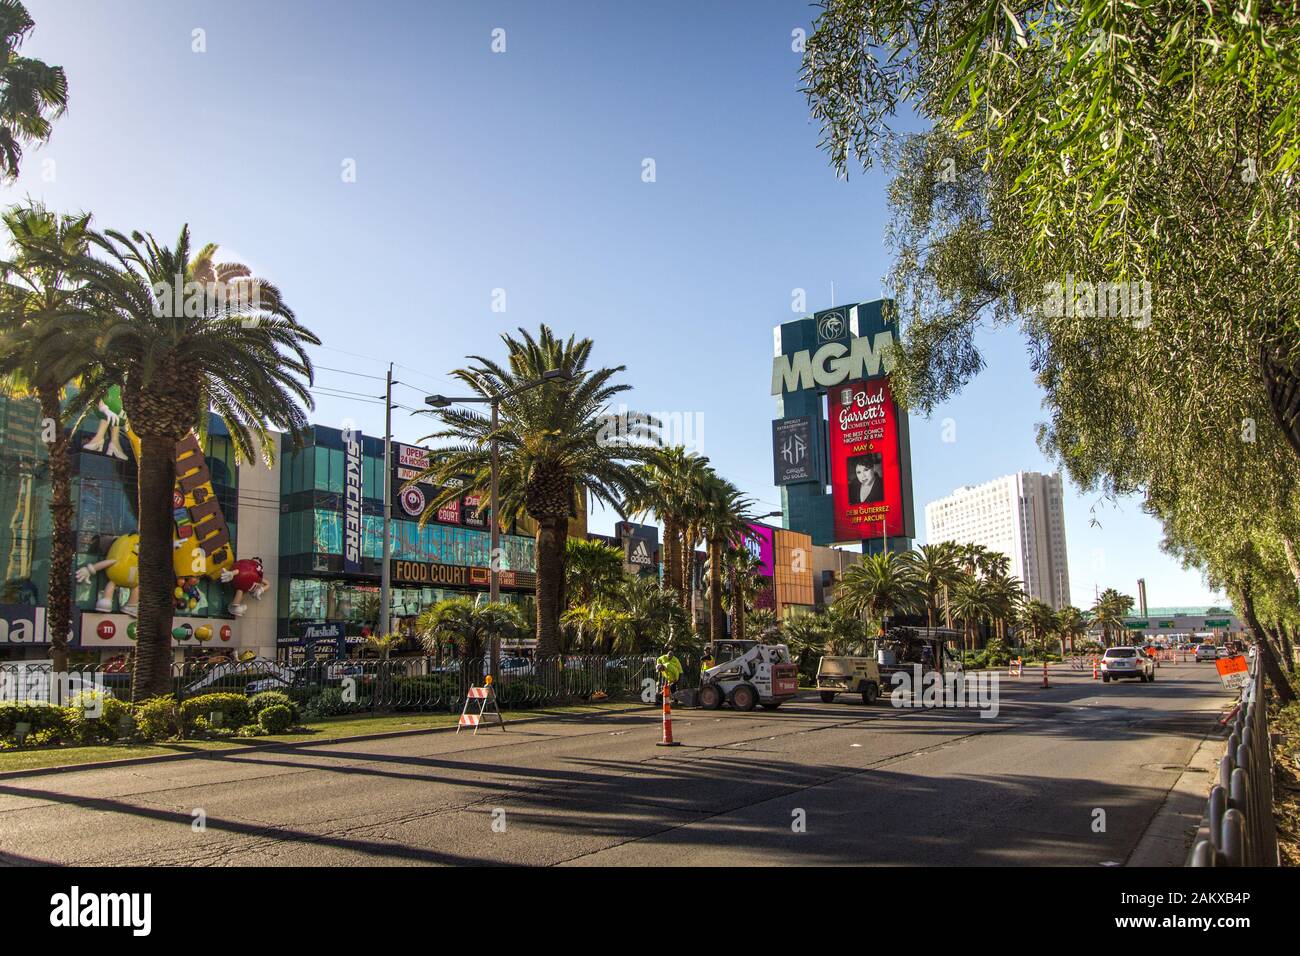 Las Vegas, Nevada - Street level view of the famous Las Vegas Strip with the MGM sign, traffic and storefronts in the heart of Las Vegas, Nevada. Stock Photo